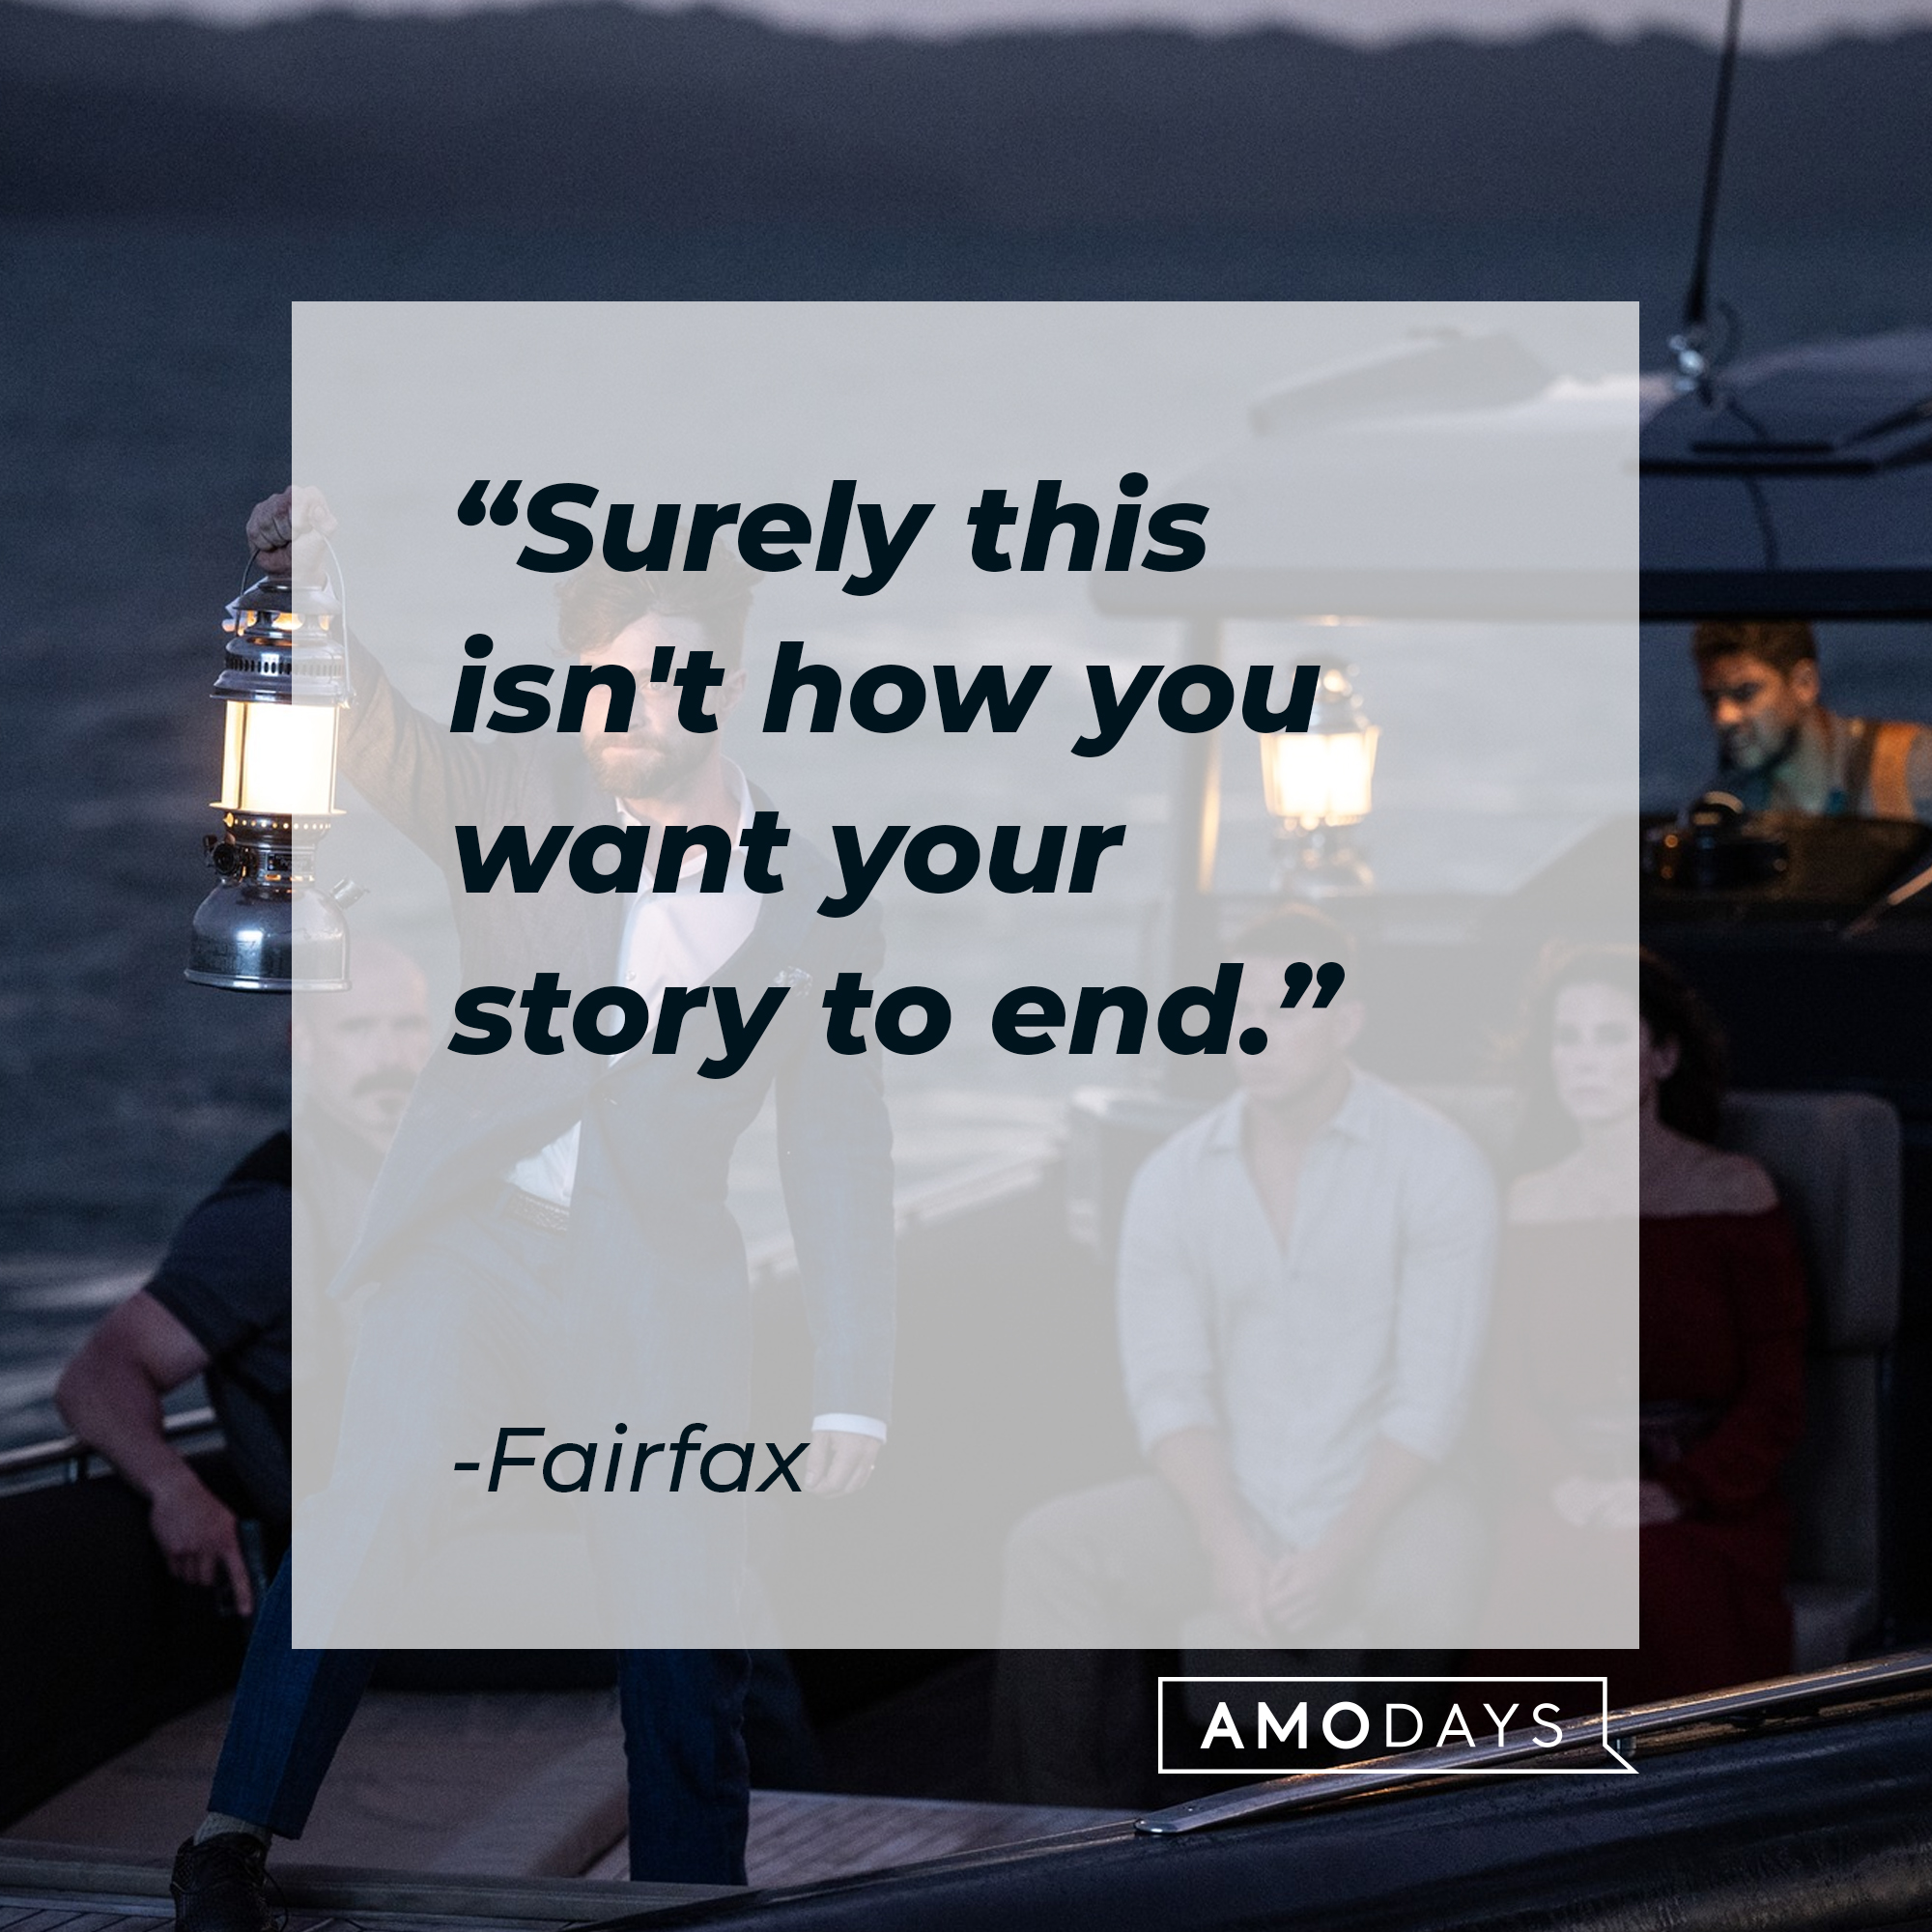 Fairfax with his quote: "Surely, this isn't how you want your story to end." | Source: facebook.com/TheLostCityMovie